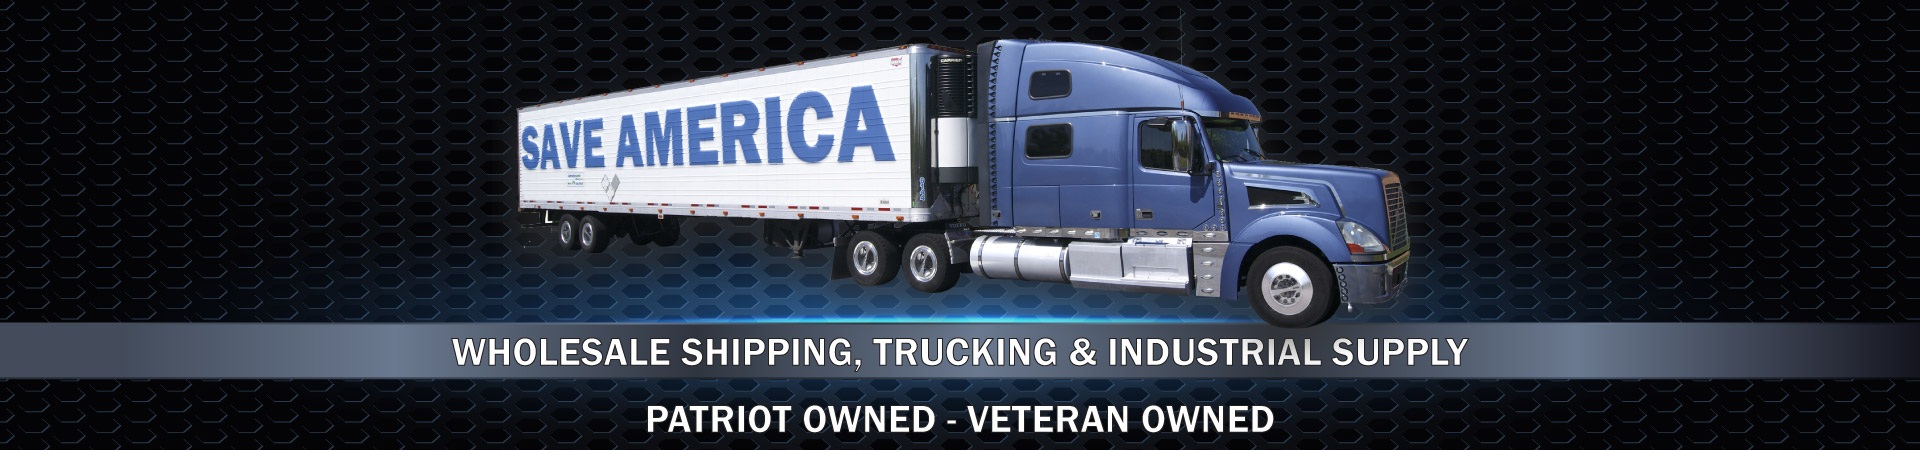 Shippers Mall Wholesale Shipping, Trucking & Industrial Supply